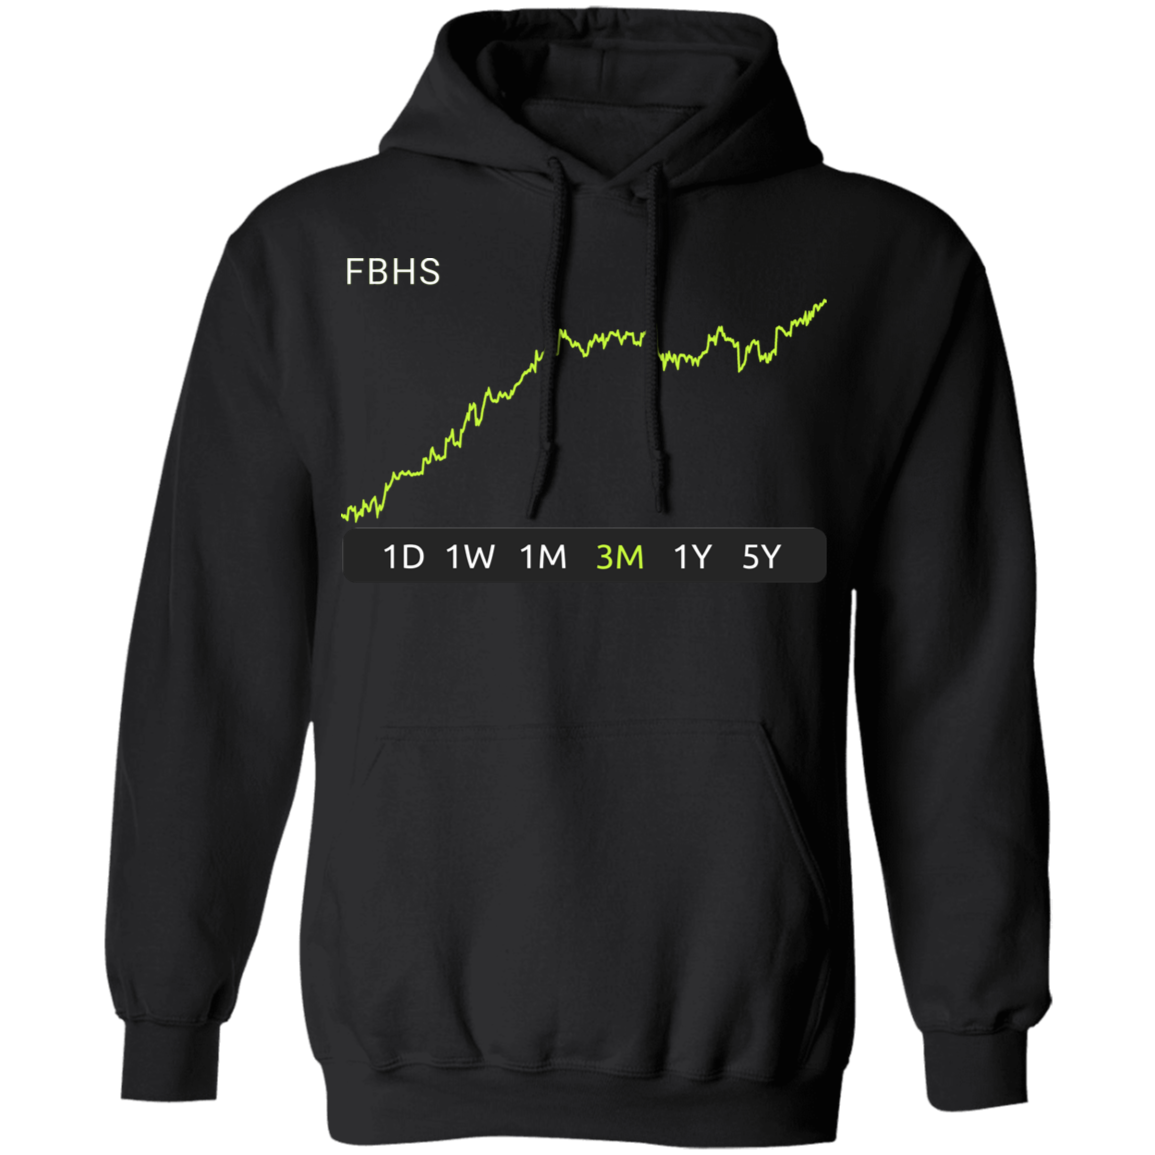 FBHS Stock 3m Pullover Hoodie